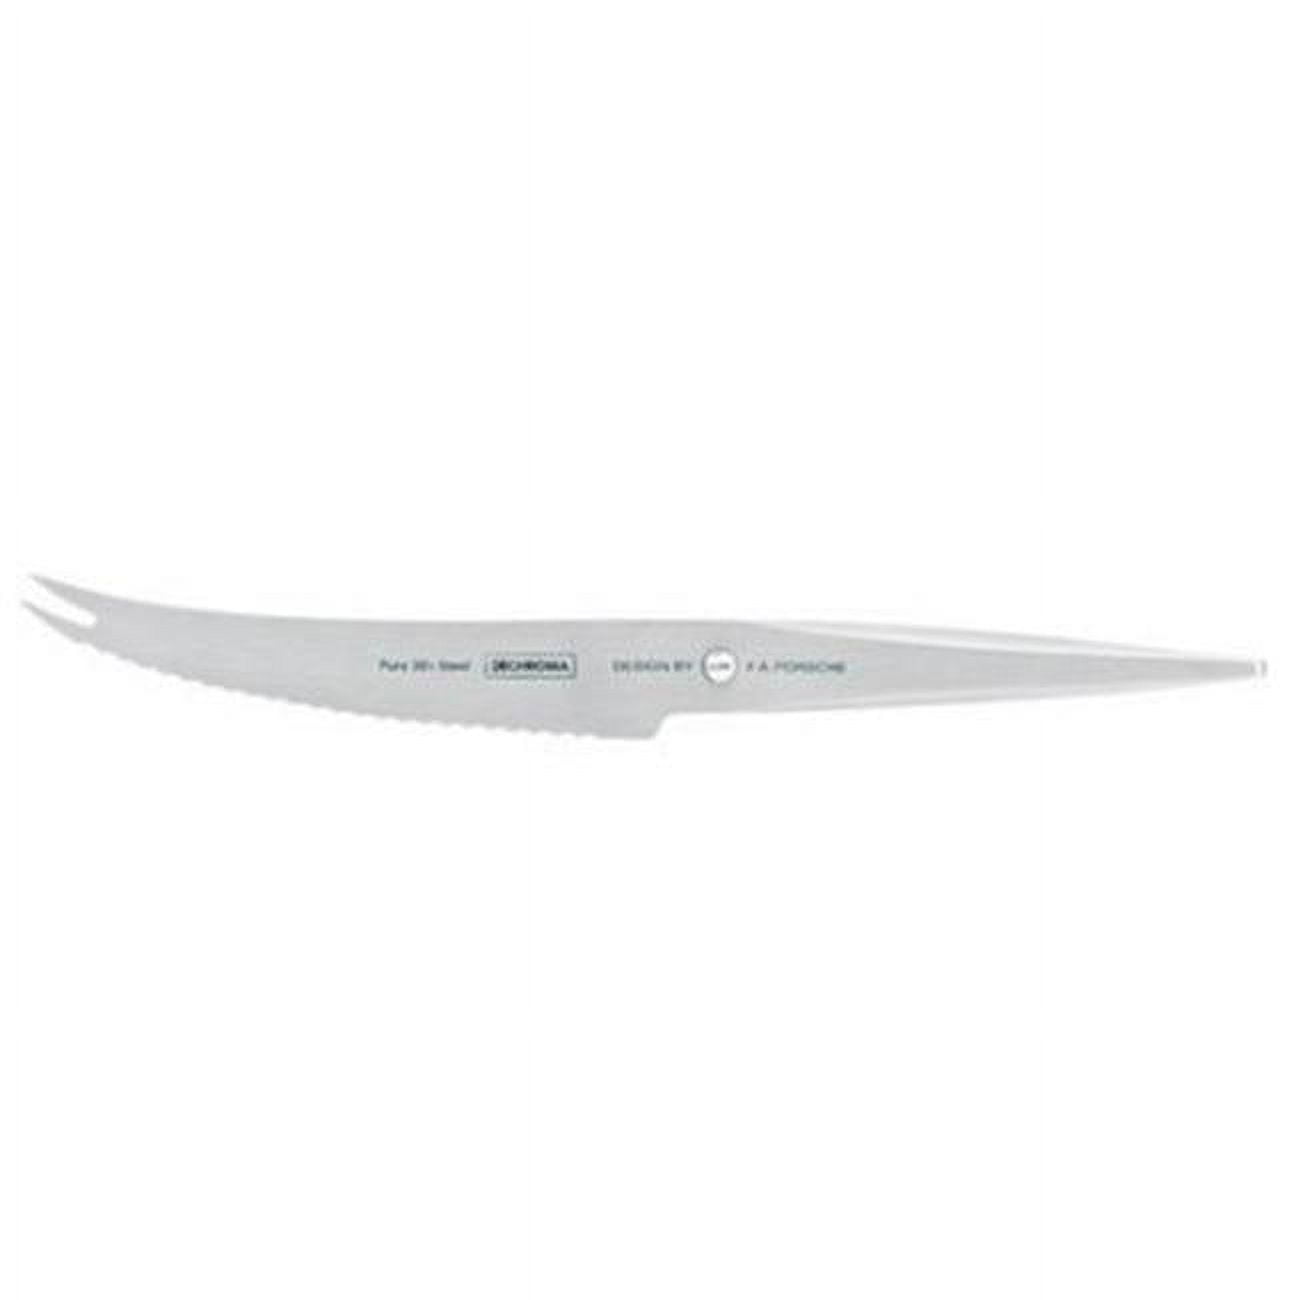 Chroma P10 Type 301 Designed By F.a. Porsche 5.75 In. Tomato Knife